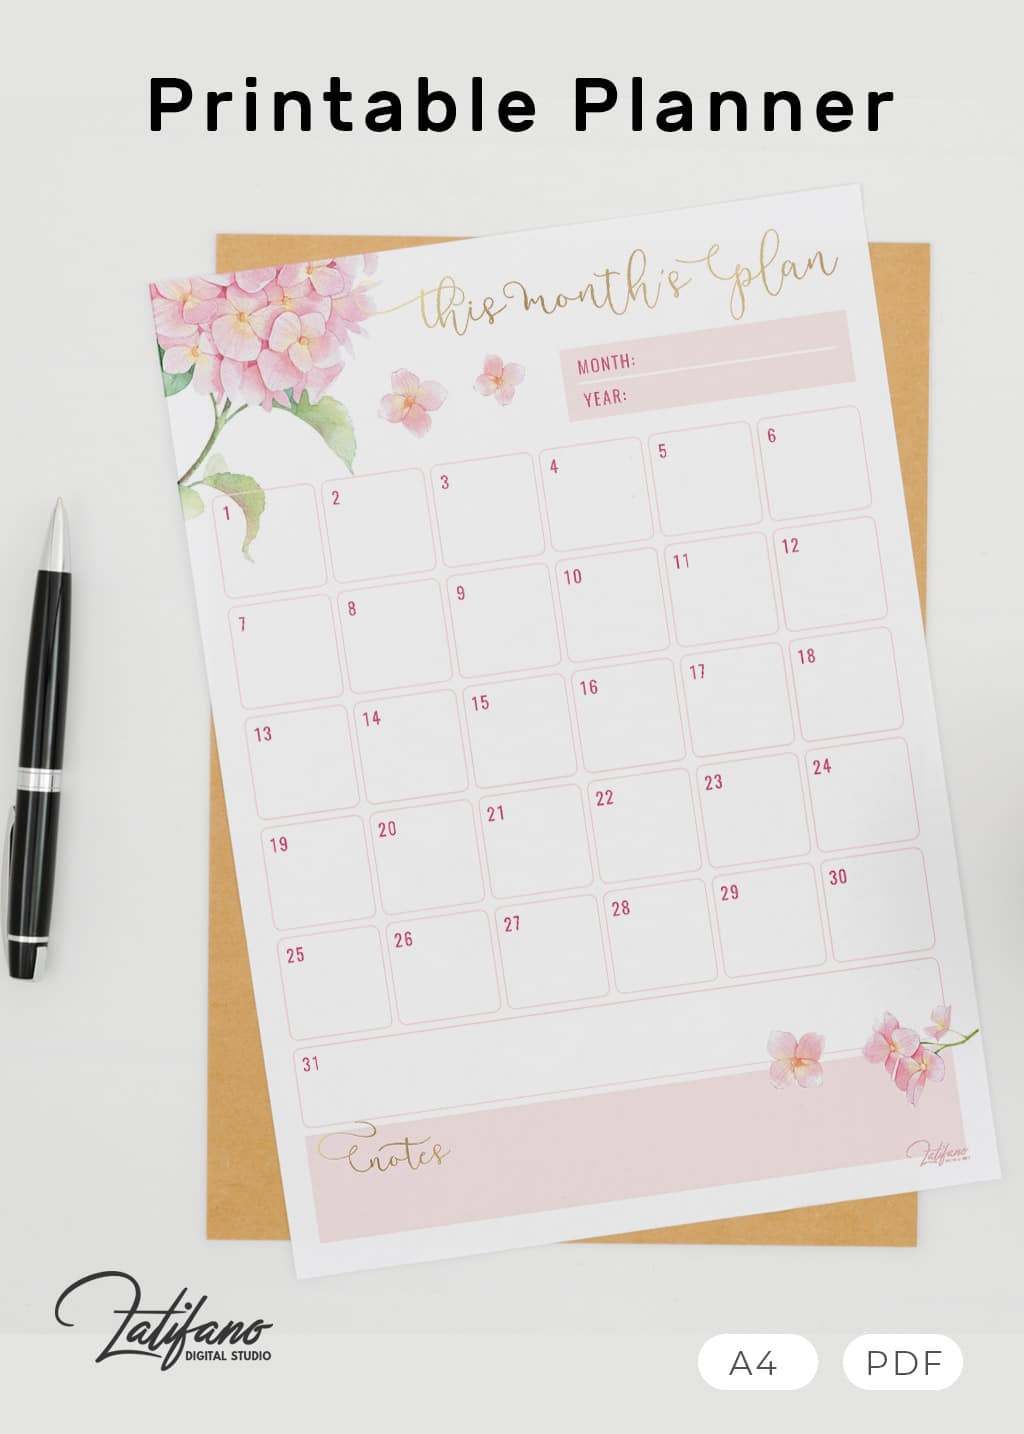 printable planner with flowers